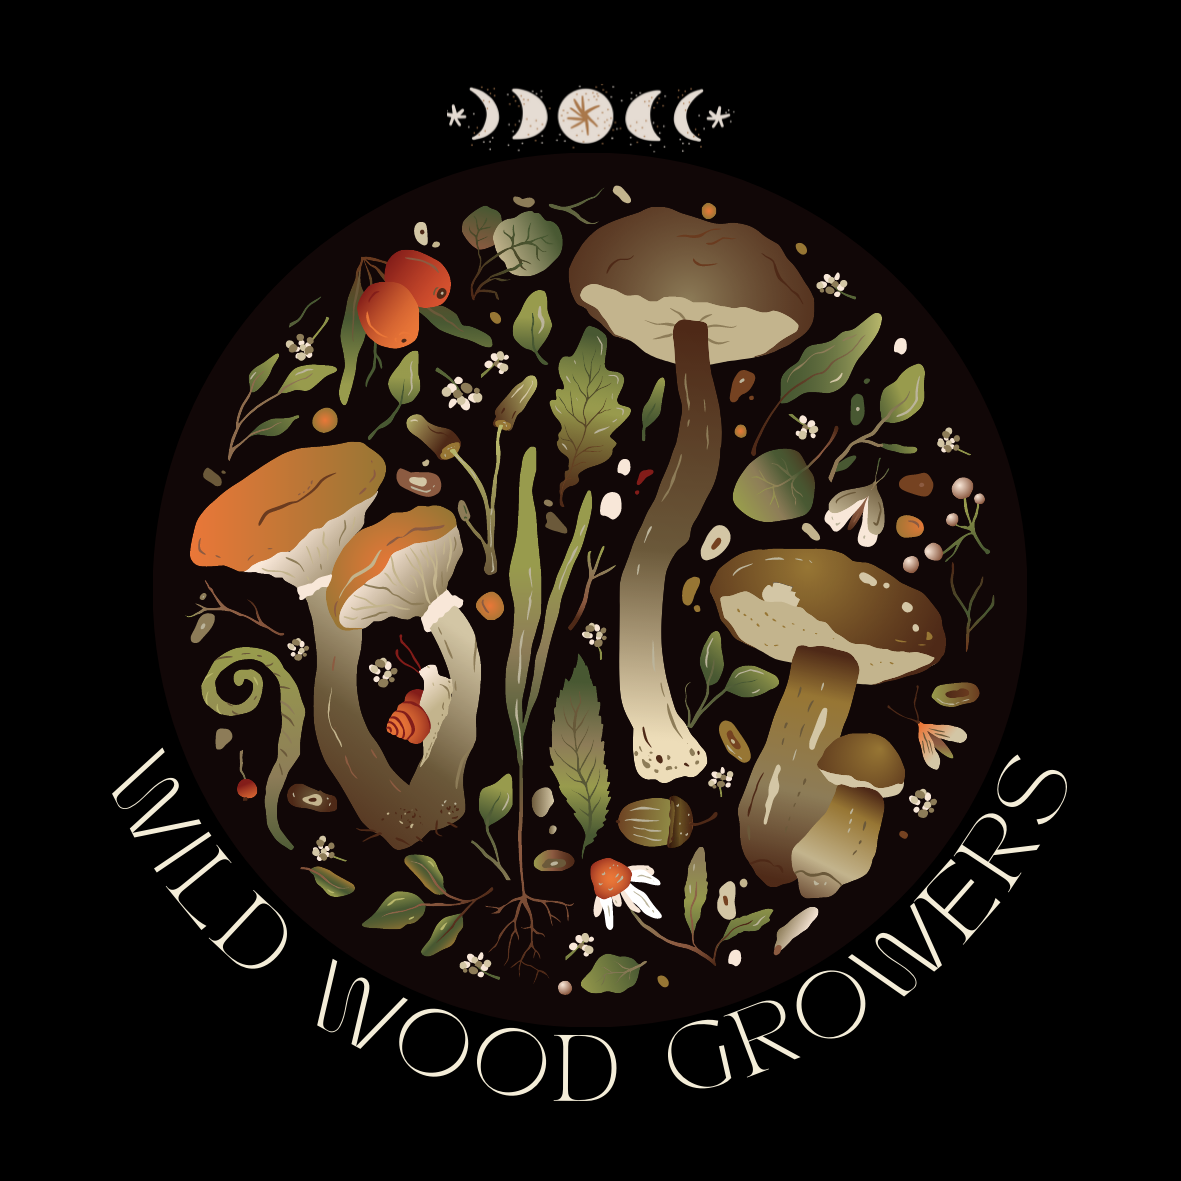 Logo with images of mushrooms and wild plants on a black background with the text 'Wild Wood Growers' around the outside